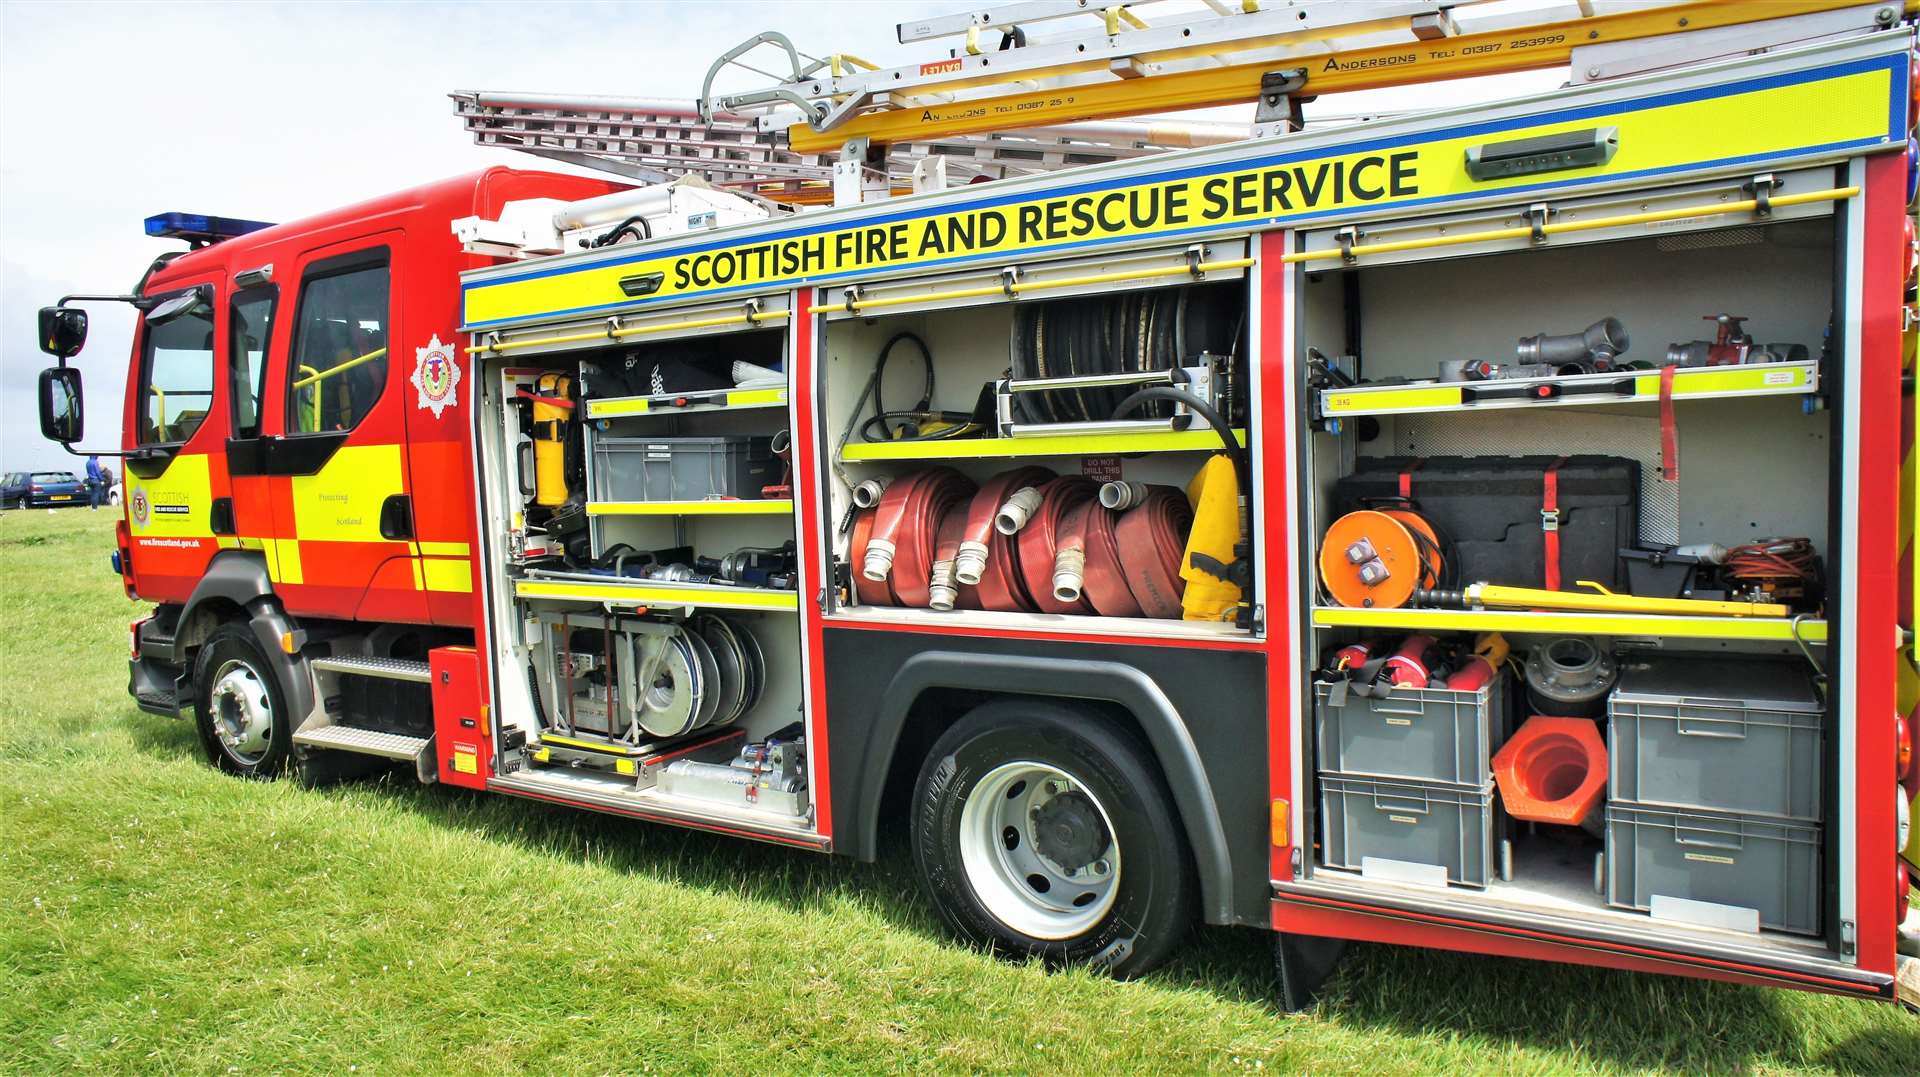 This fire service vehicle was a popular attraction. Picture: DGS